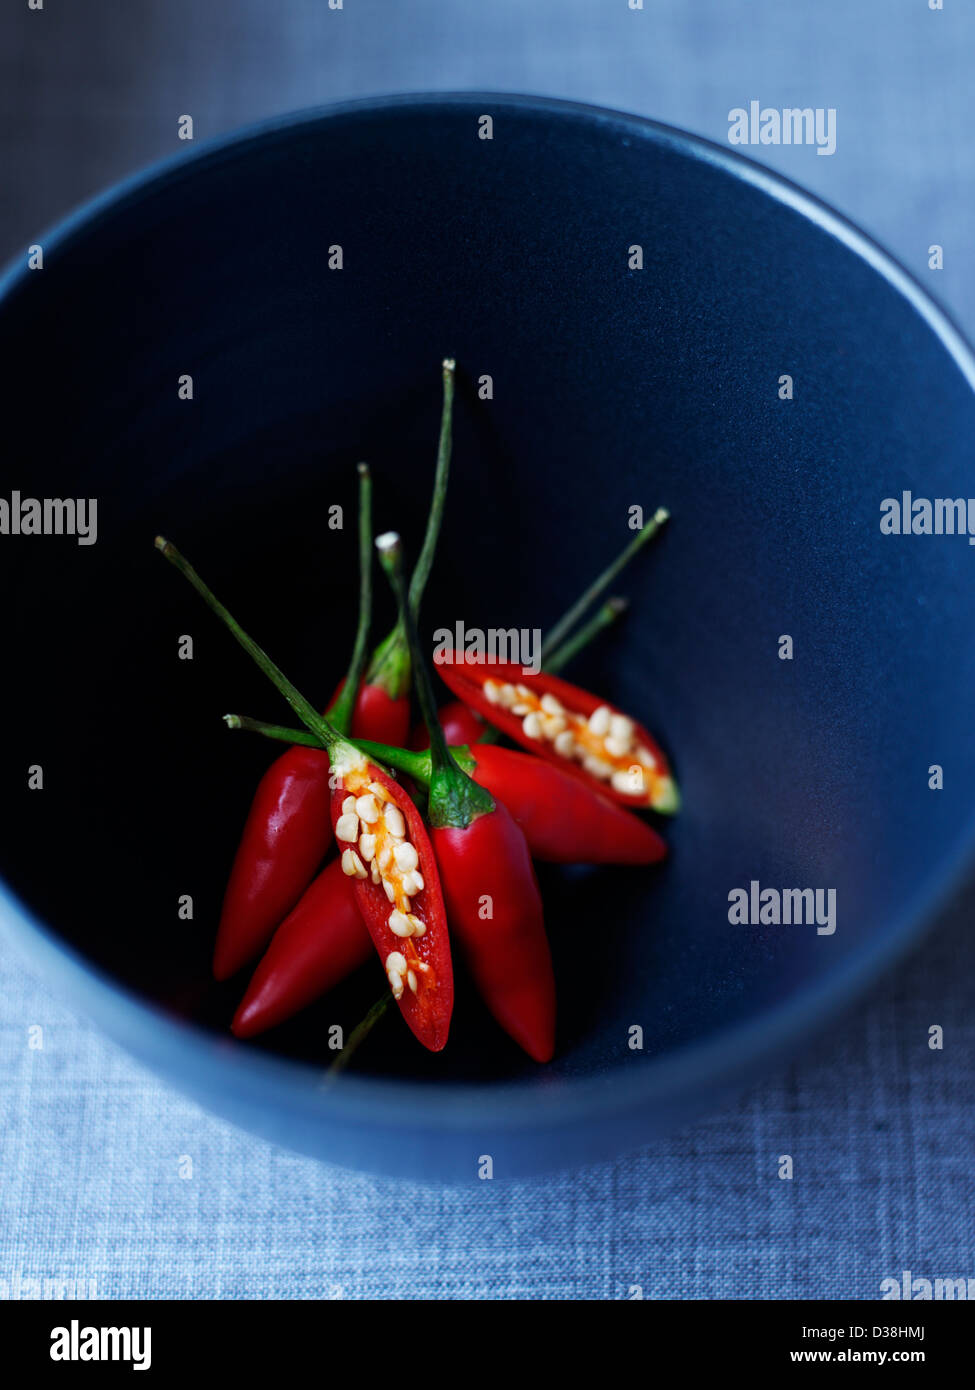 Bowl of sliced chili peppers Stock Photo